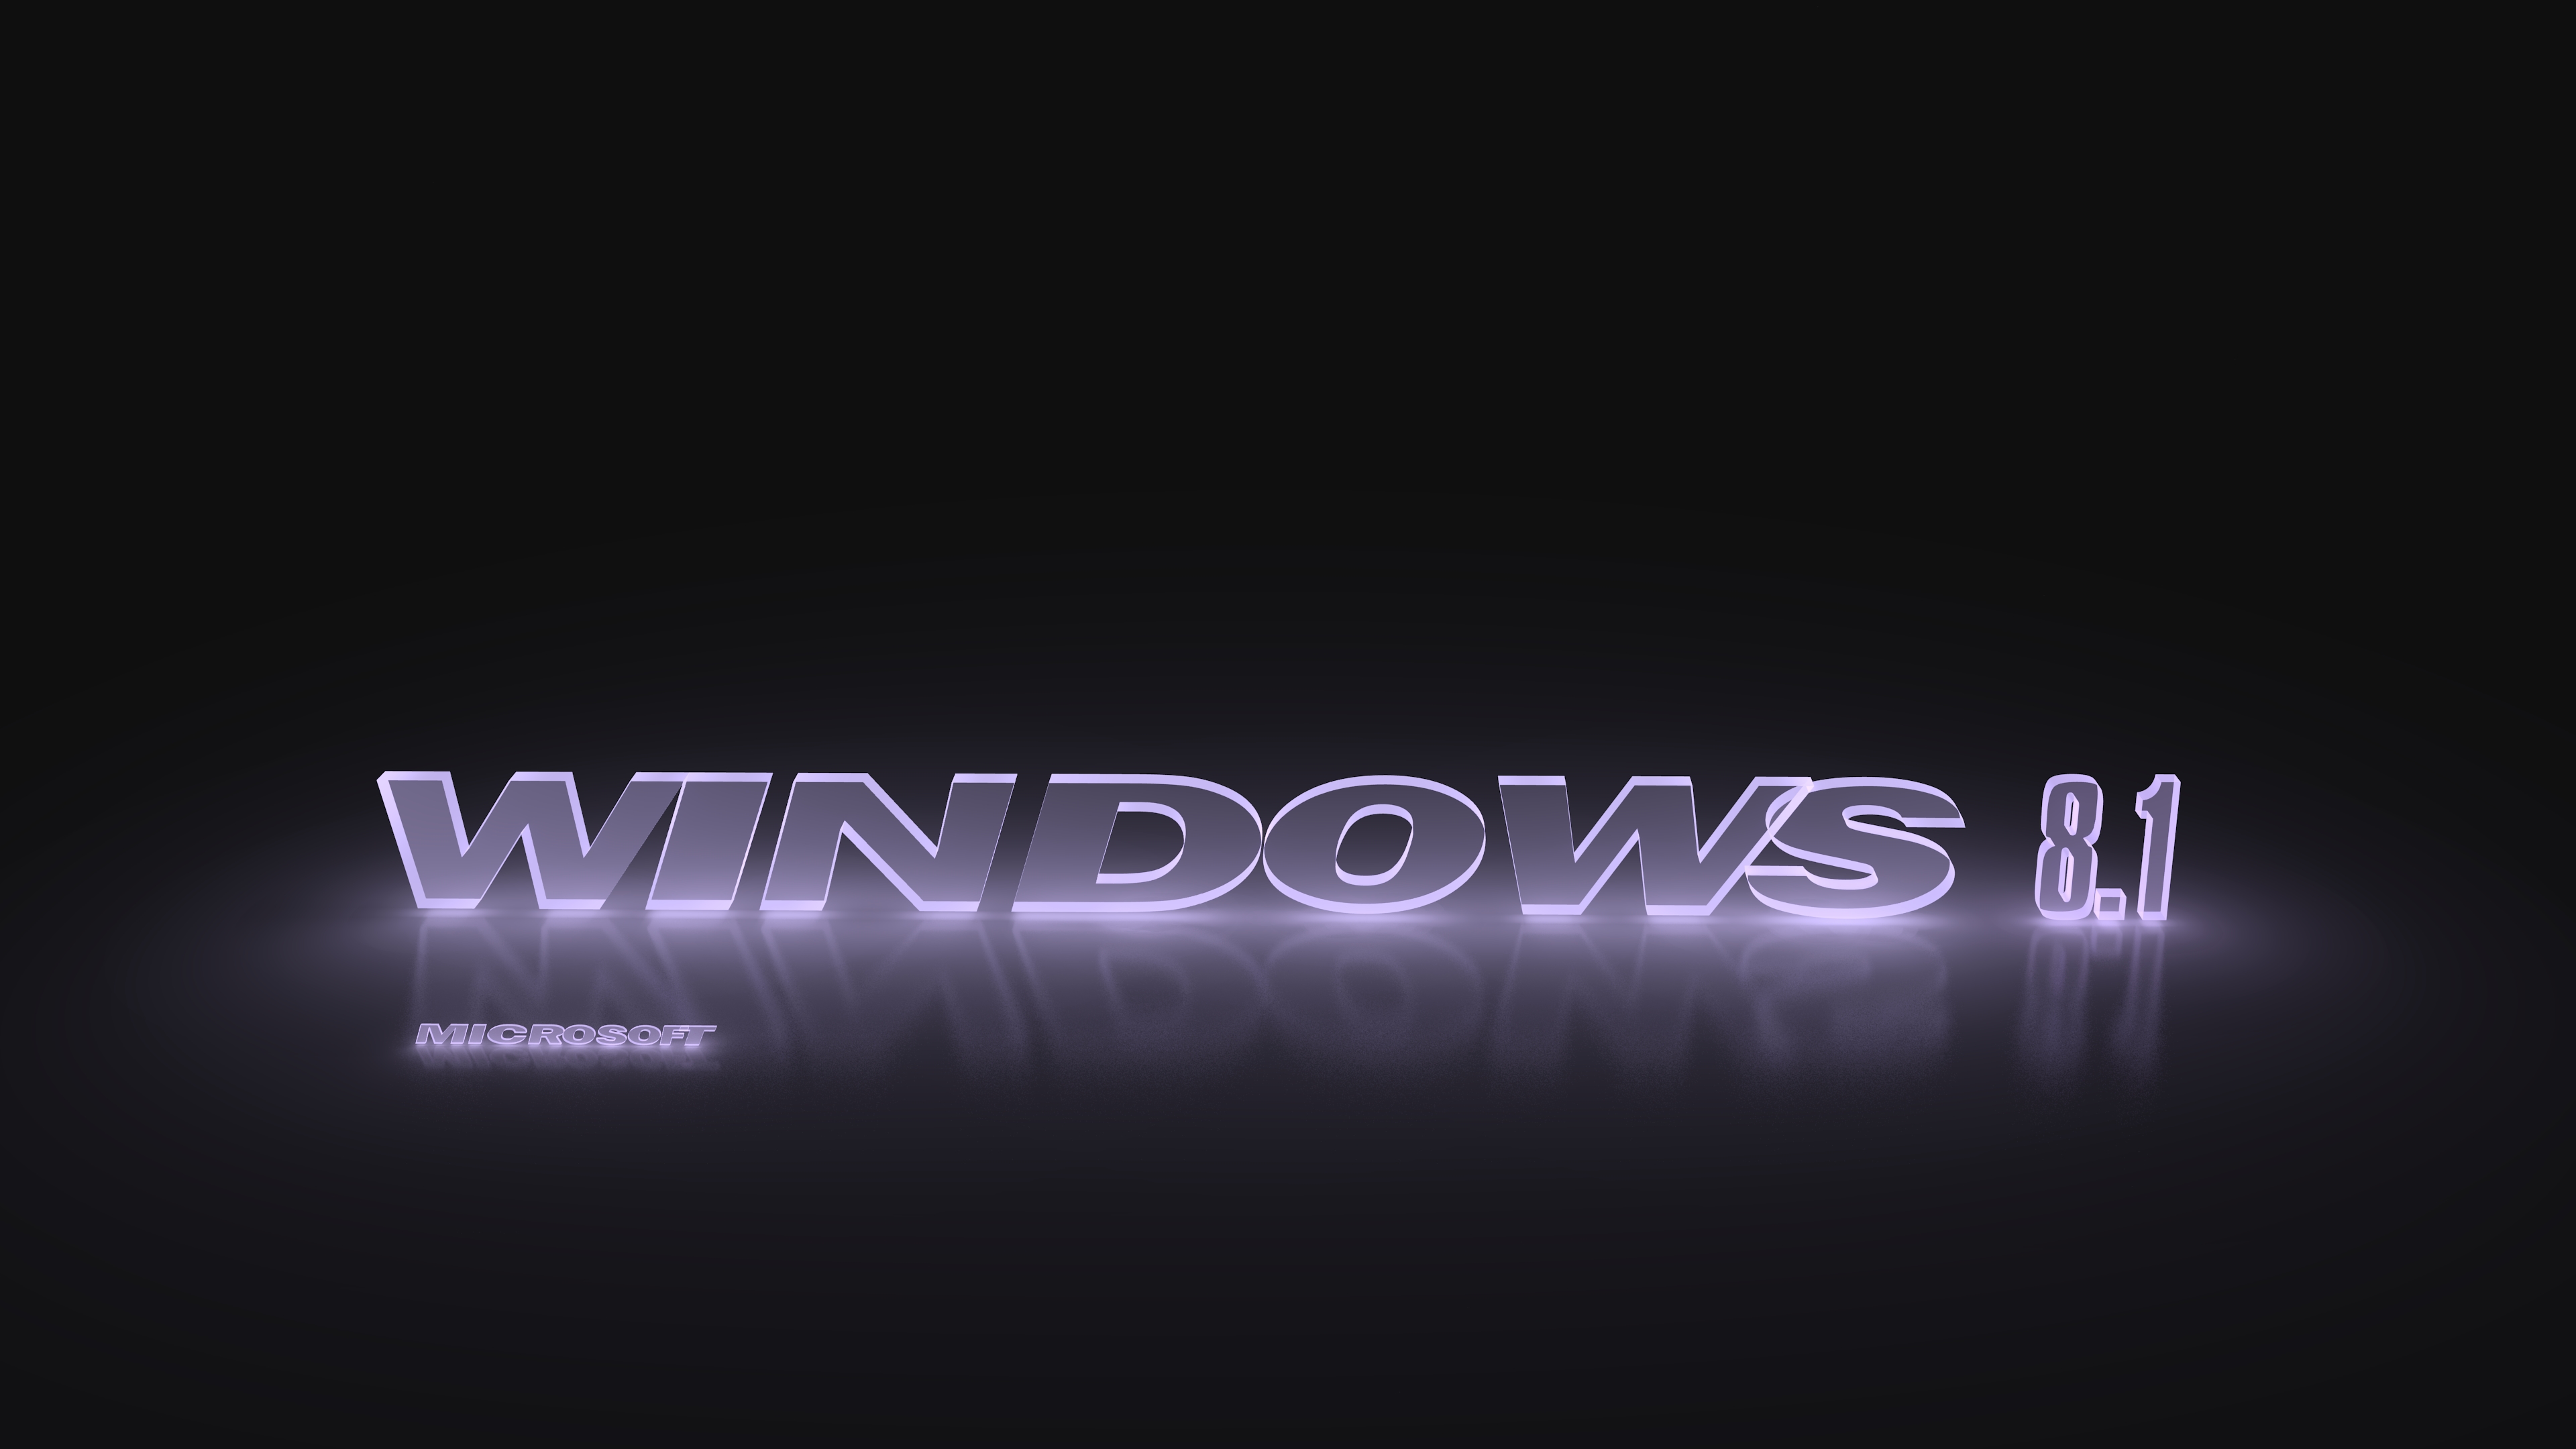 11 Windows 8.1 HD Wallpapers | Backgrounds - Wallpaper Abyss